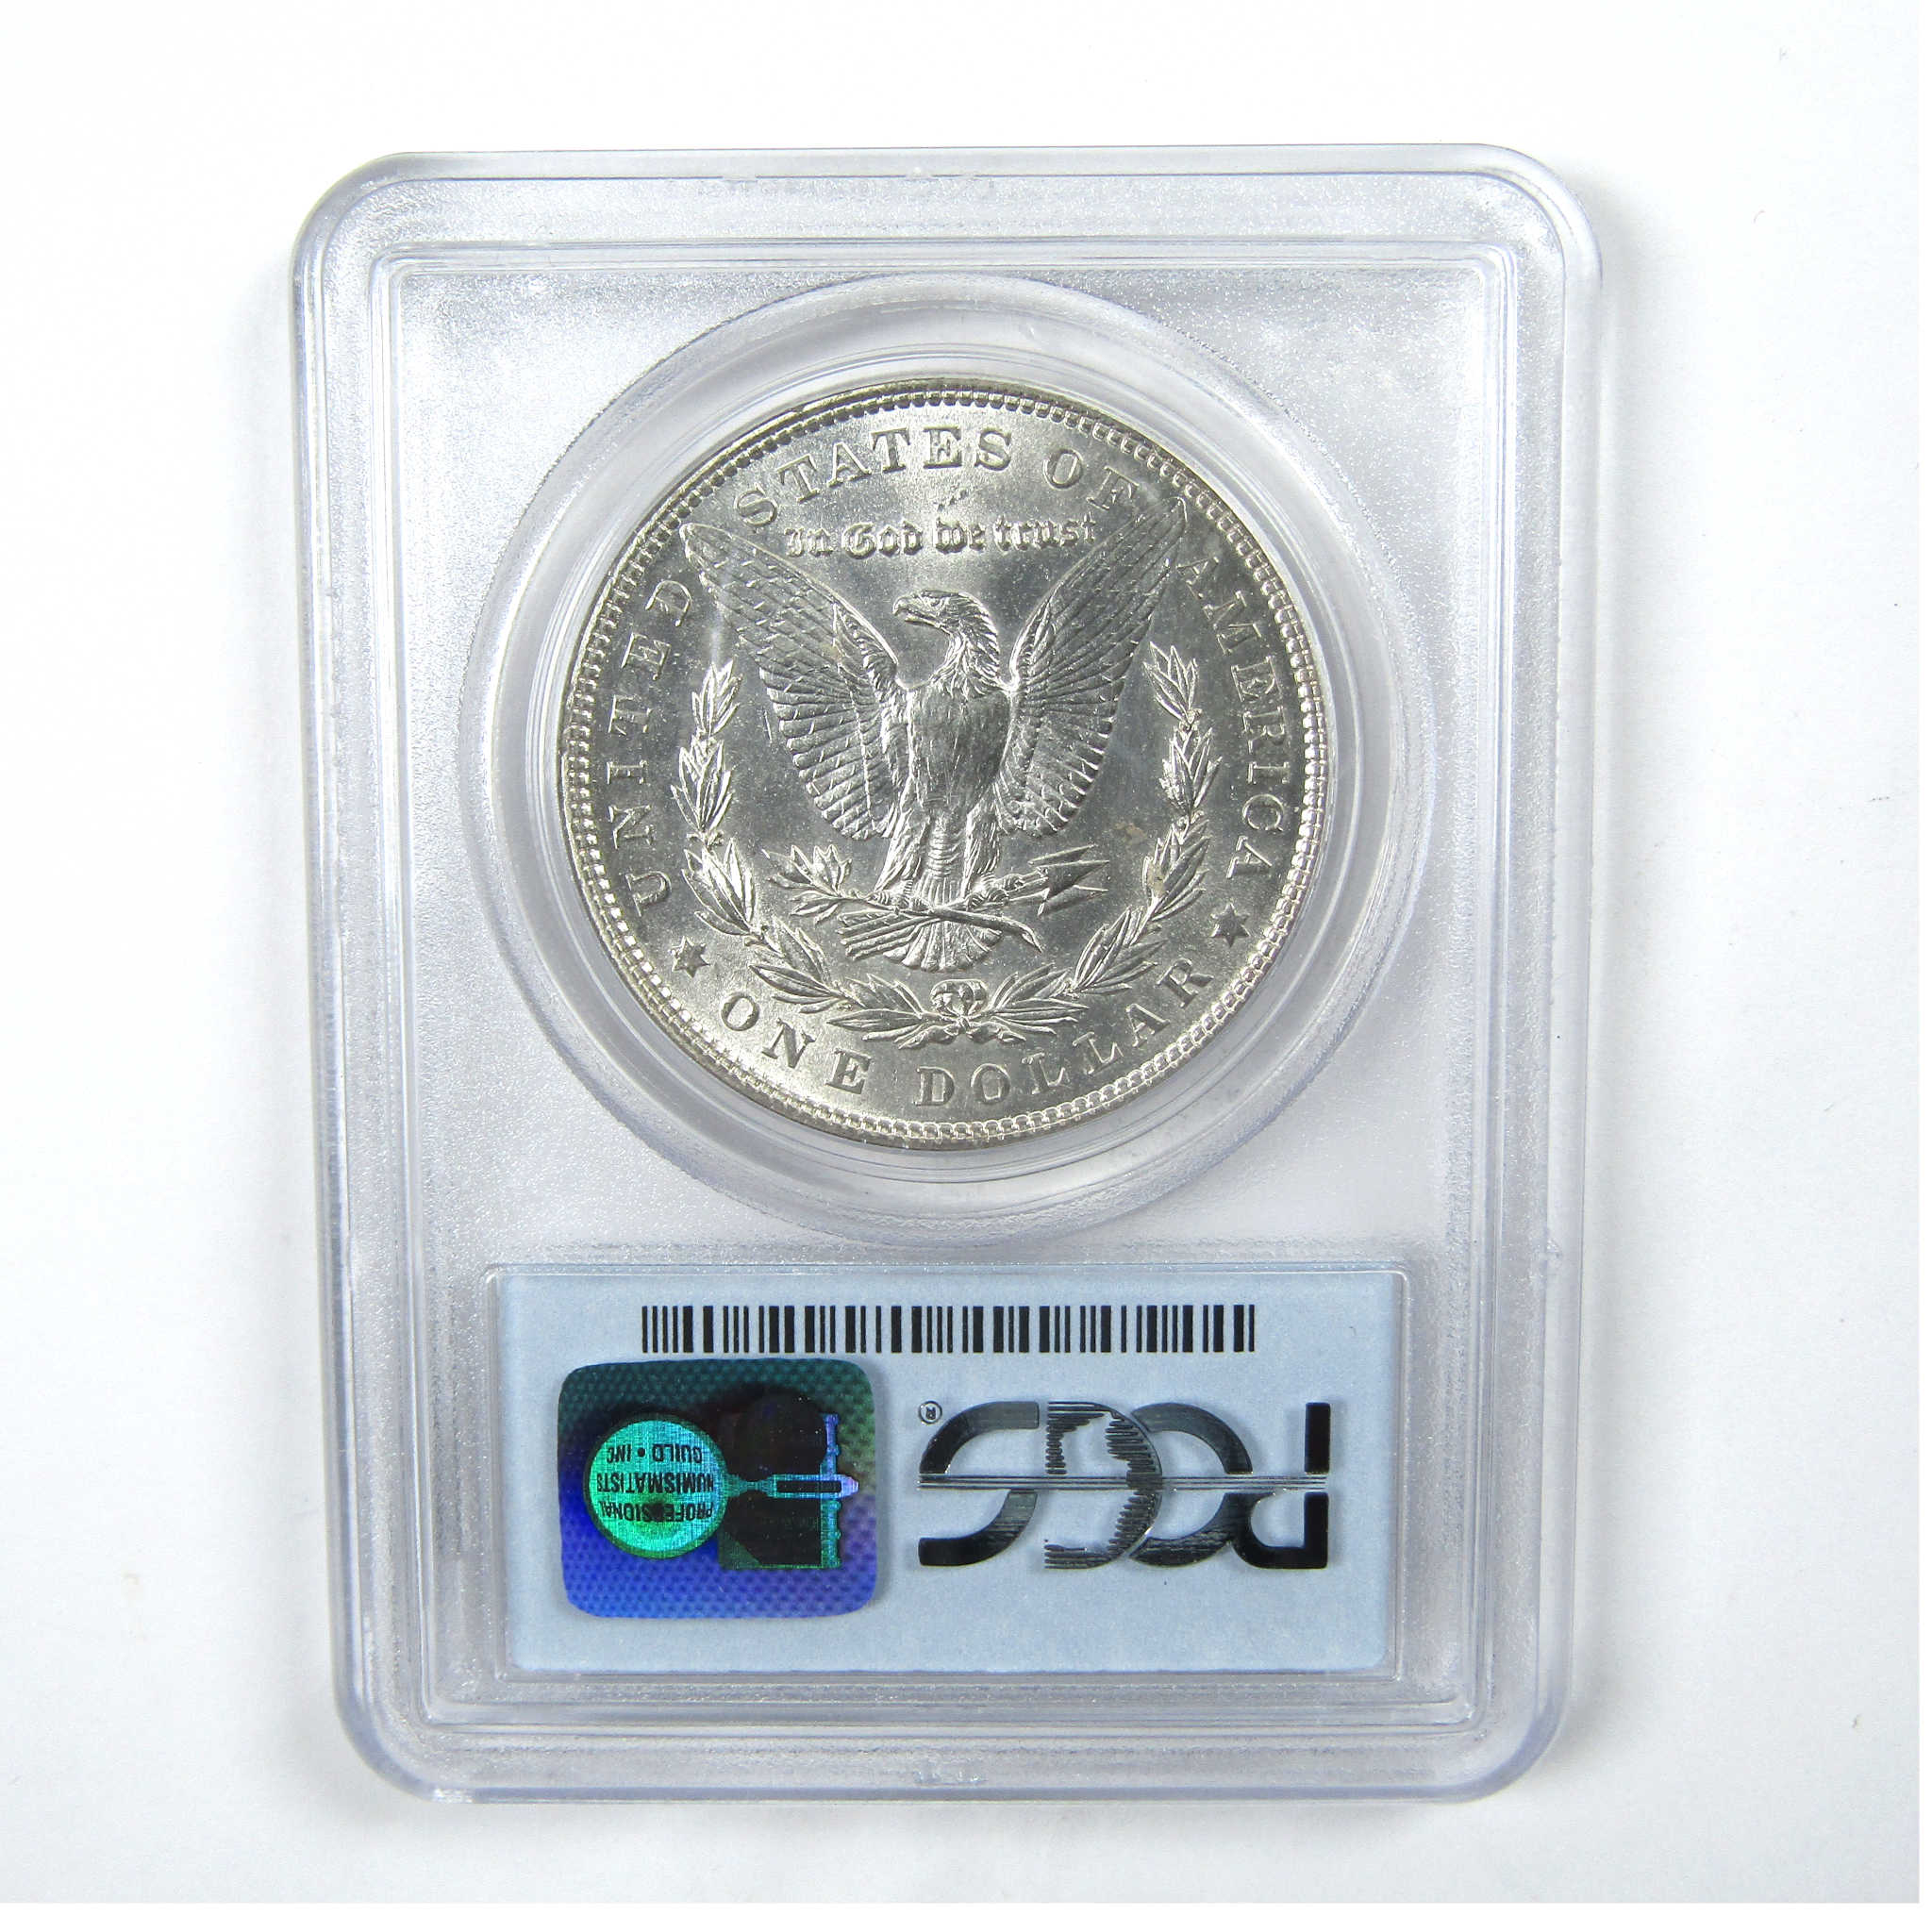 1903 Morgan Dollar MS 63 PCGS Silver $1 Uncirculated Coin SKU:CPC7162 - Morgan coin - Morgan silver dollar - Morgan silver dollar for sale - Profile Coins &amp; Collectibles